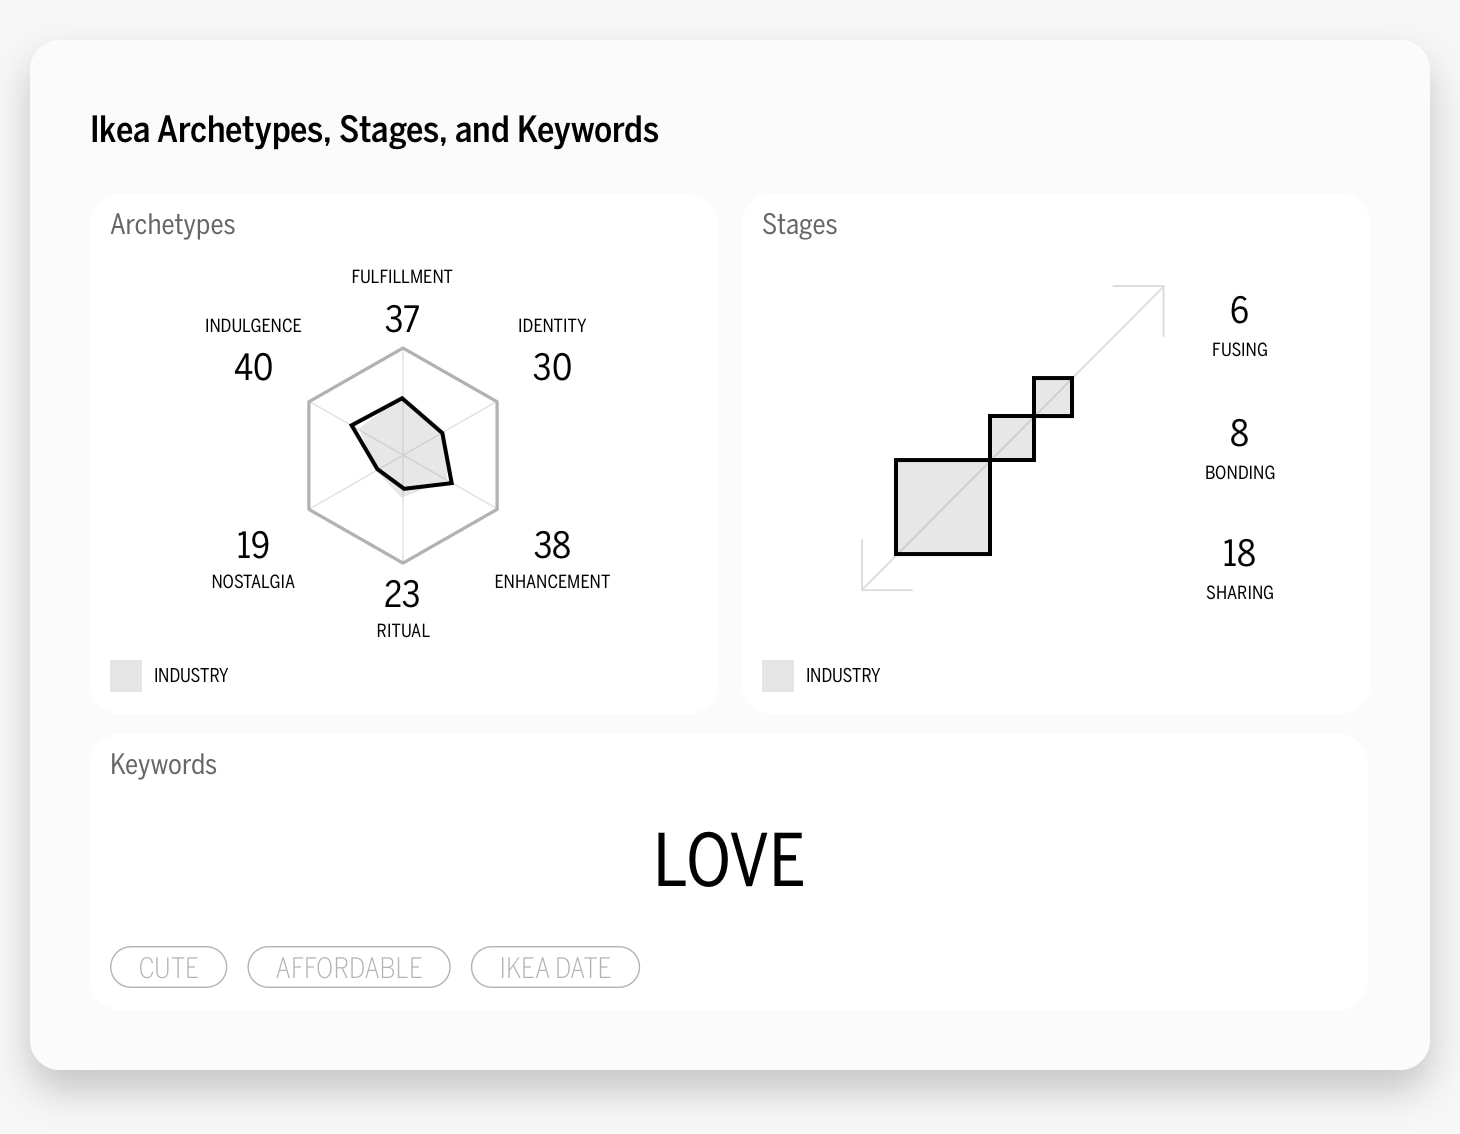 Ikea Archetypes, Stages and Keywords chart
